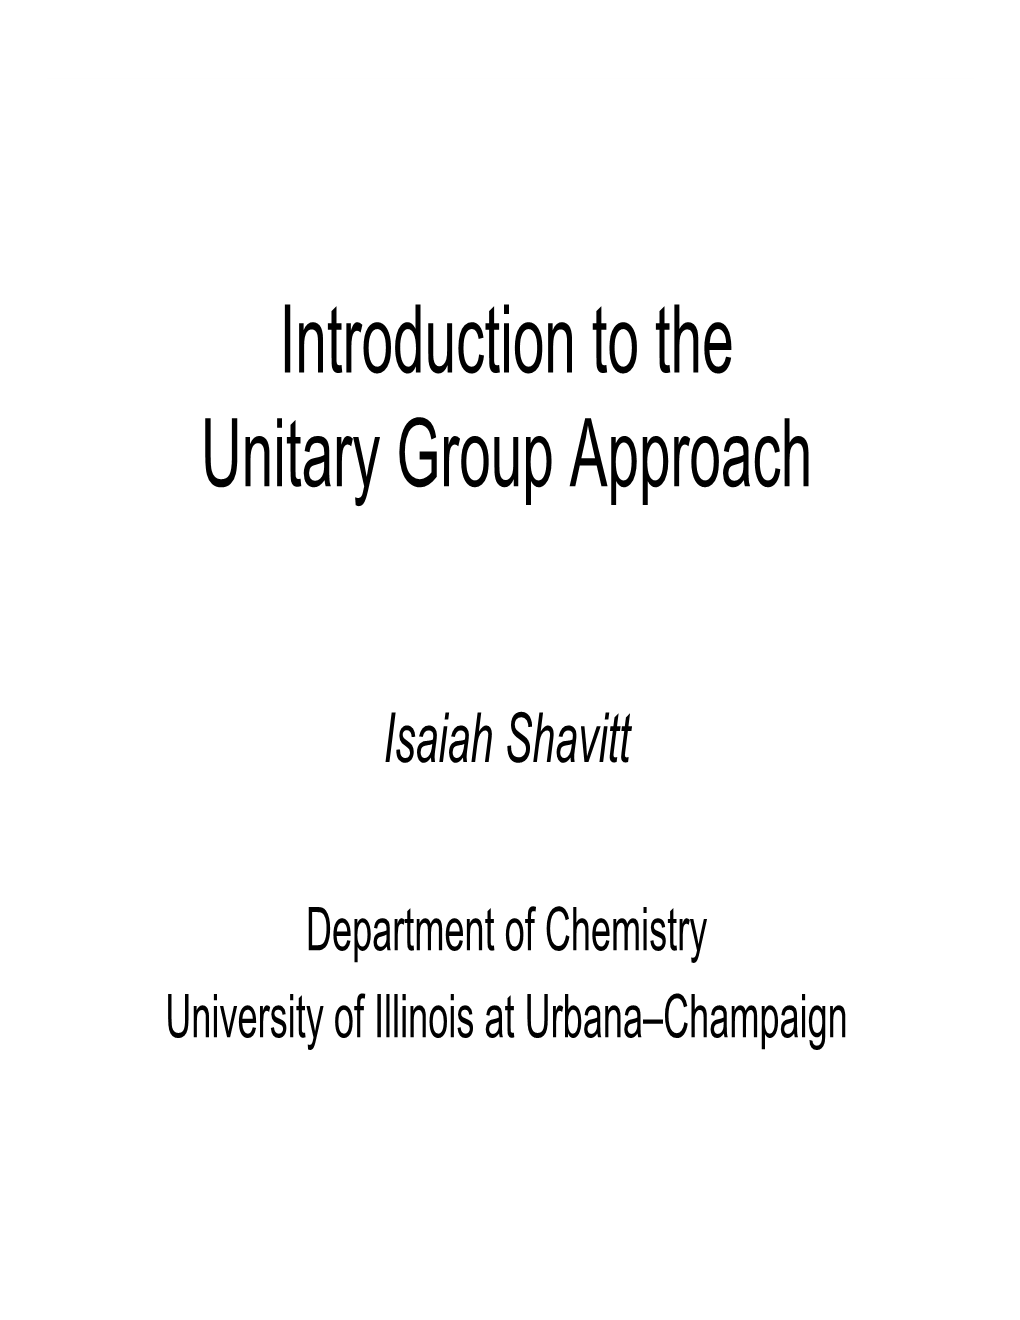 Introduction to the Unitary Group Approach